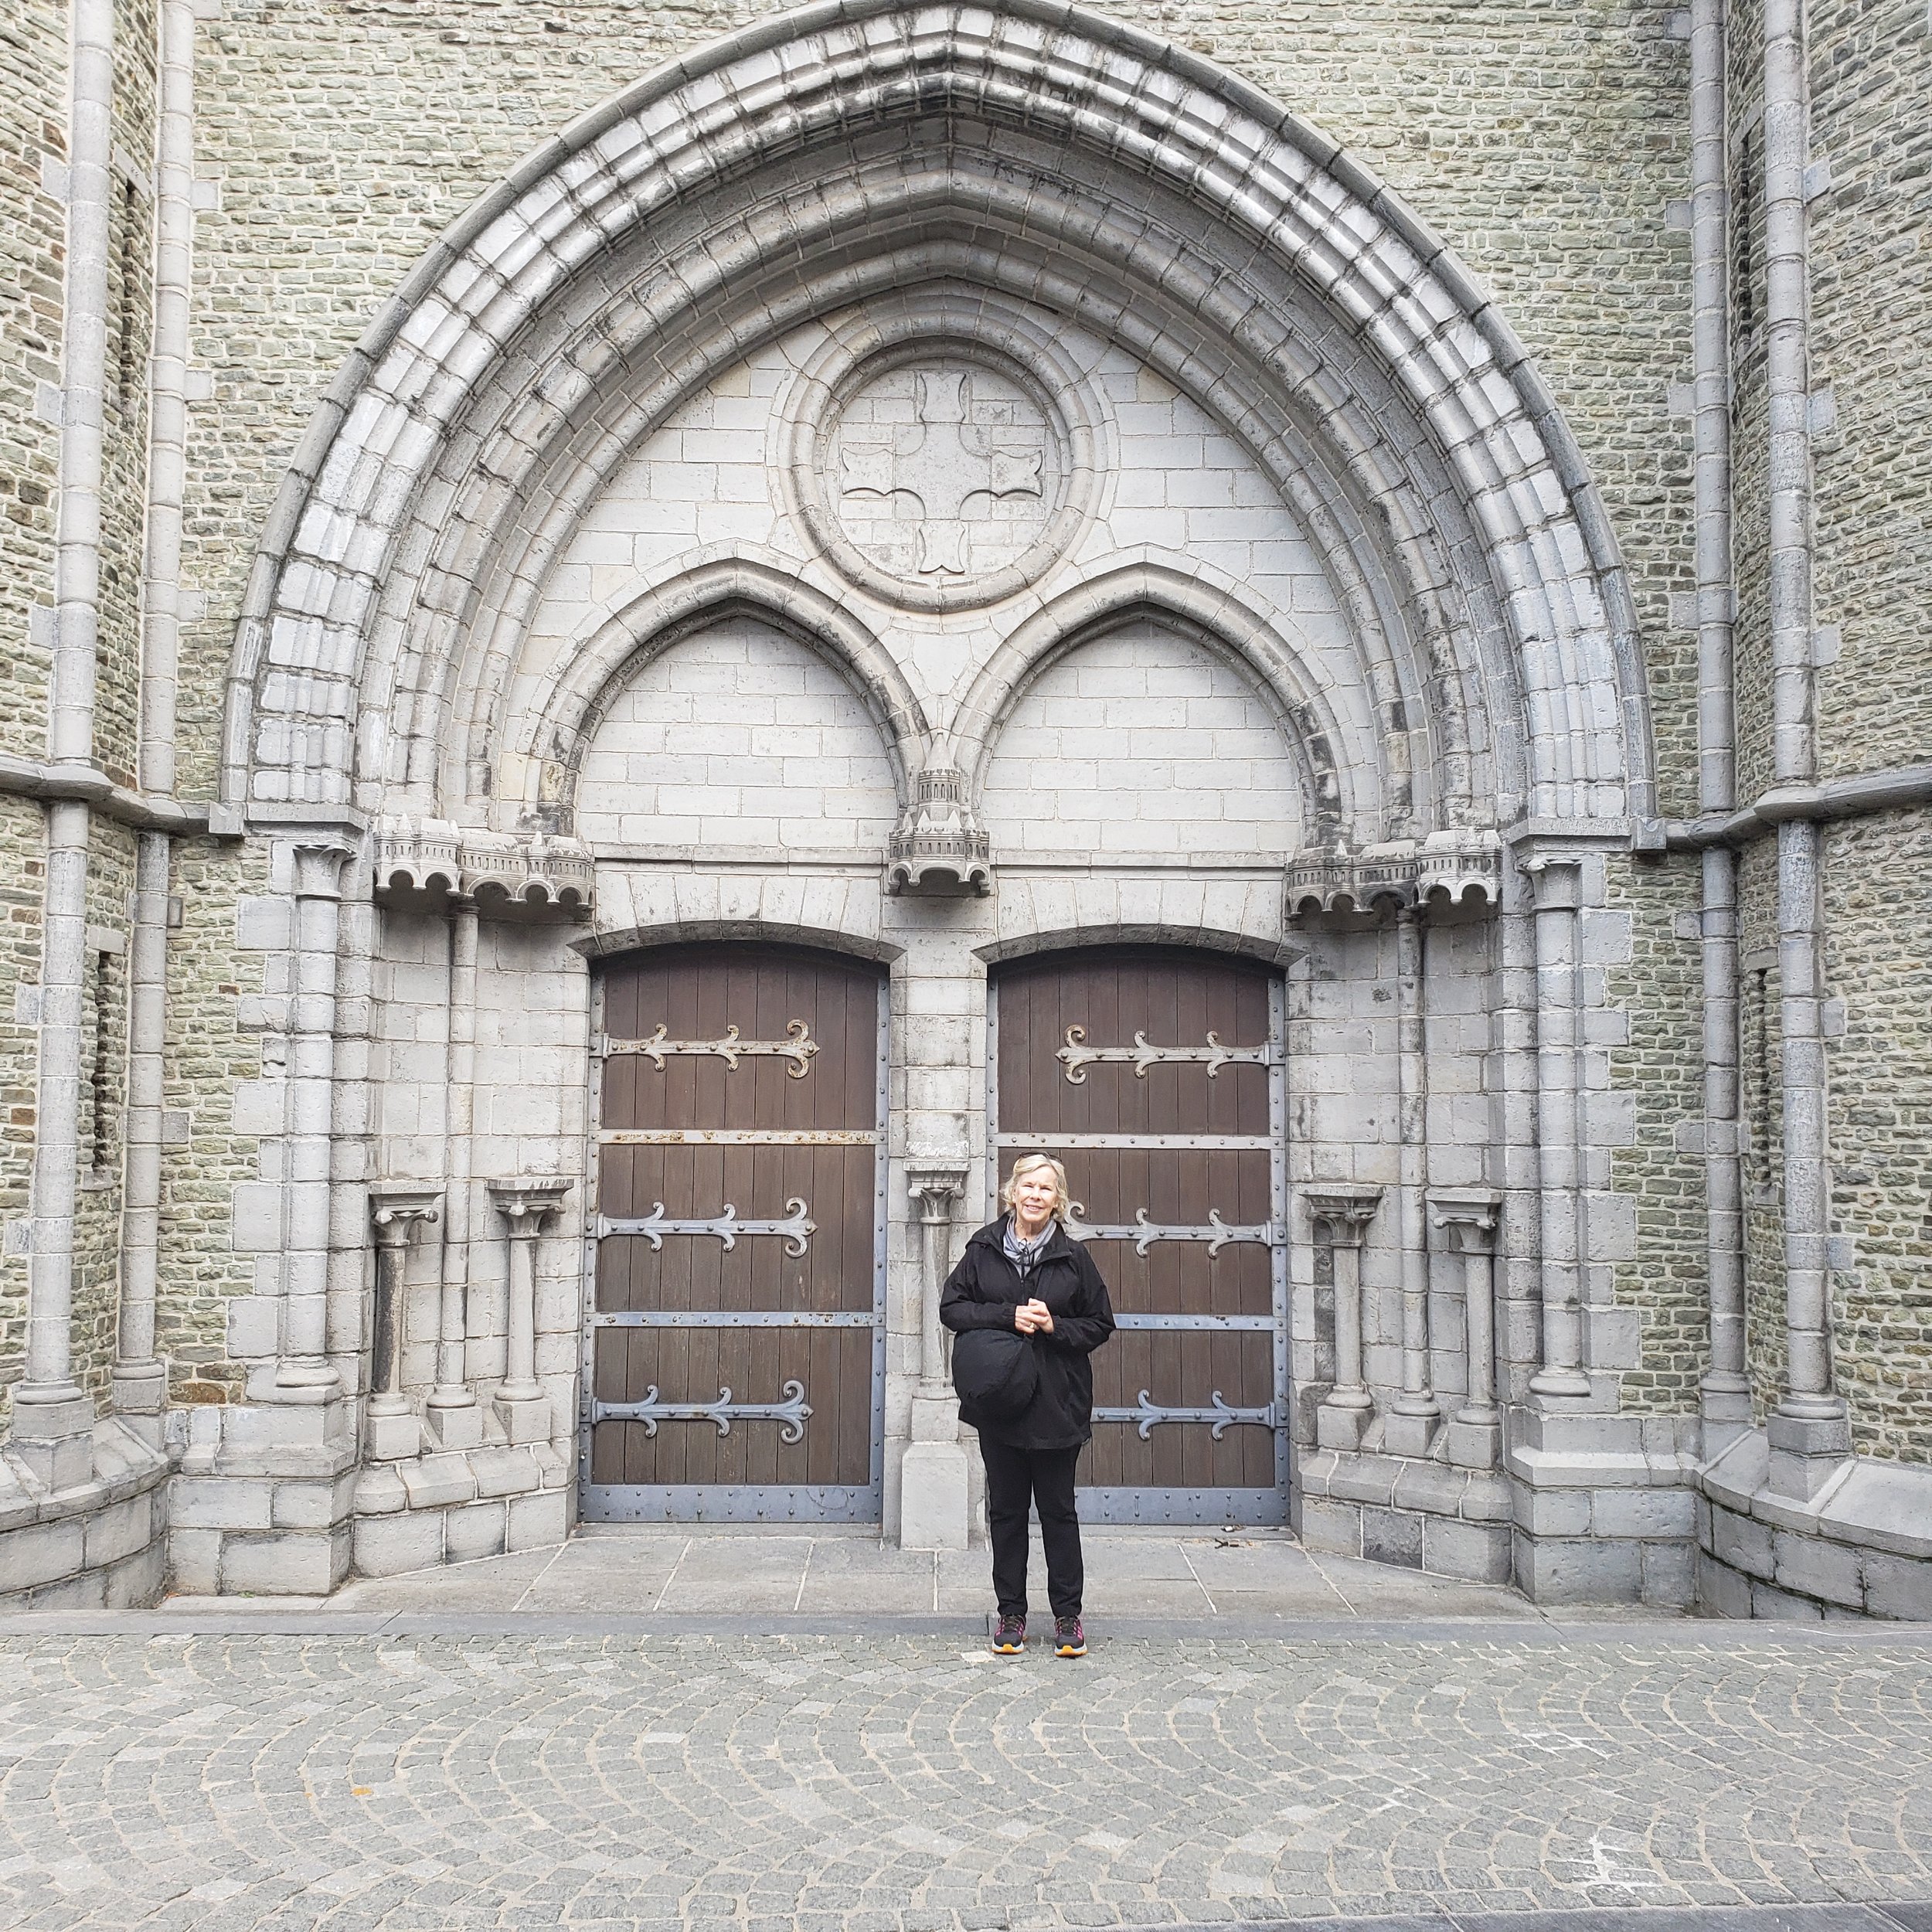  Jeri in front of the church.  